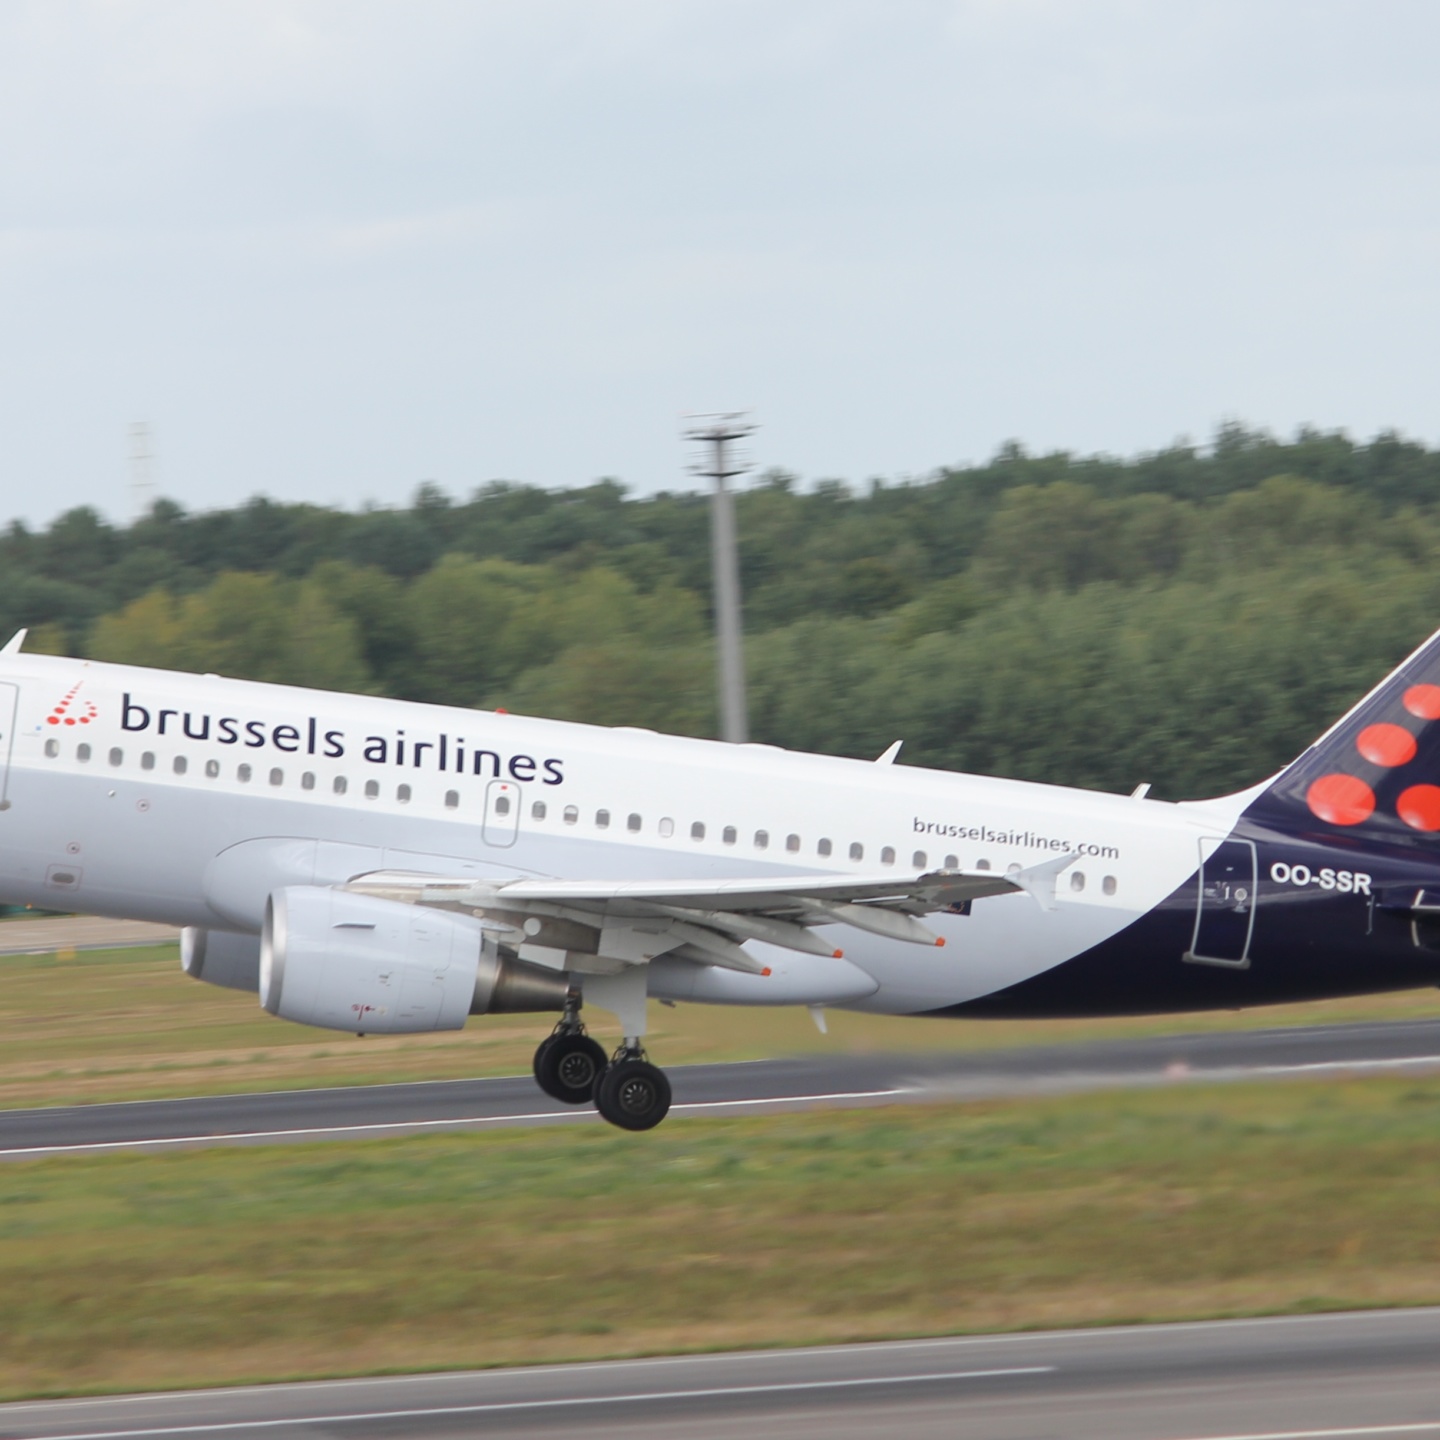 Brussels Airlines is “Going the Extra Smile” Again